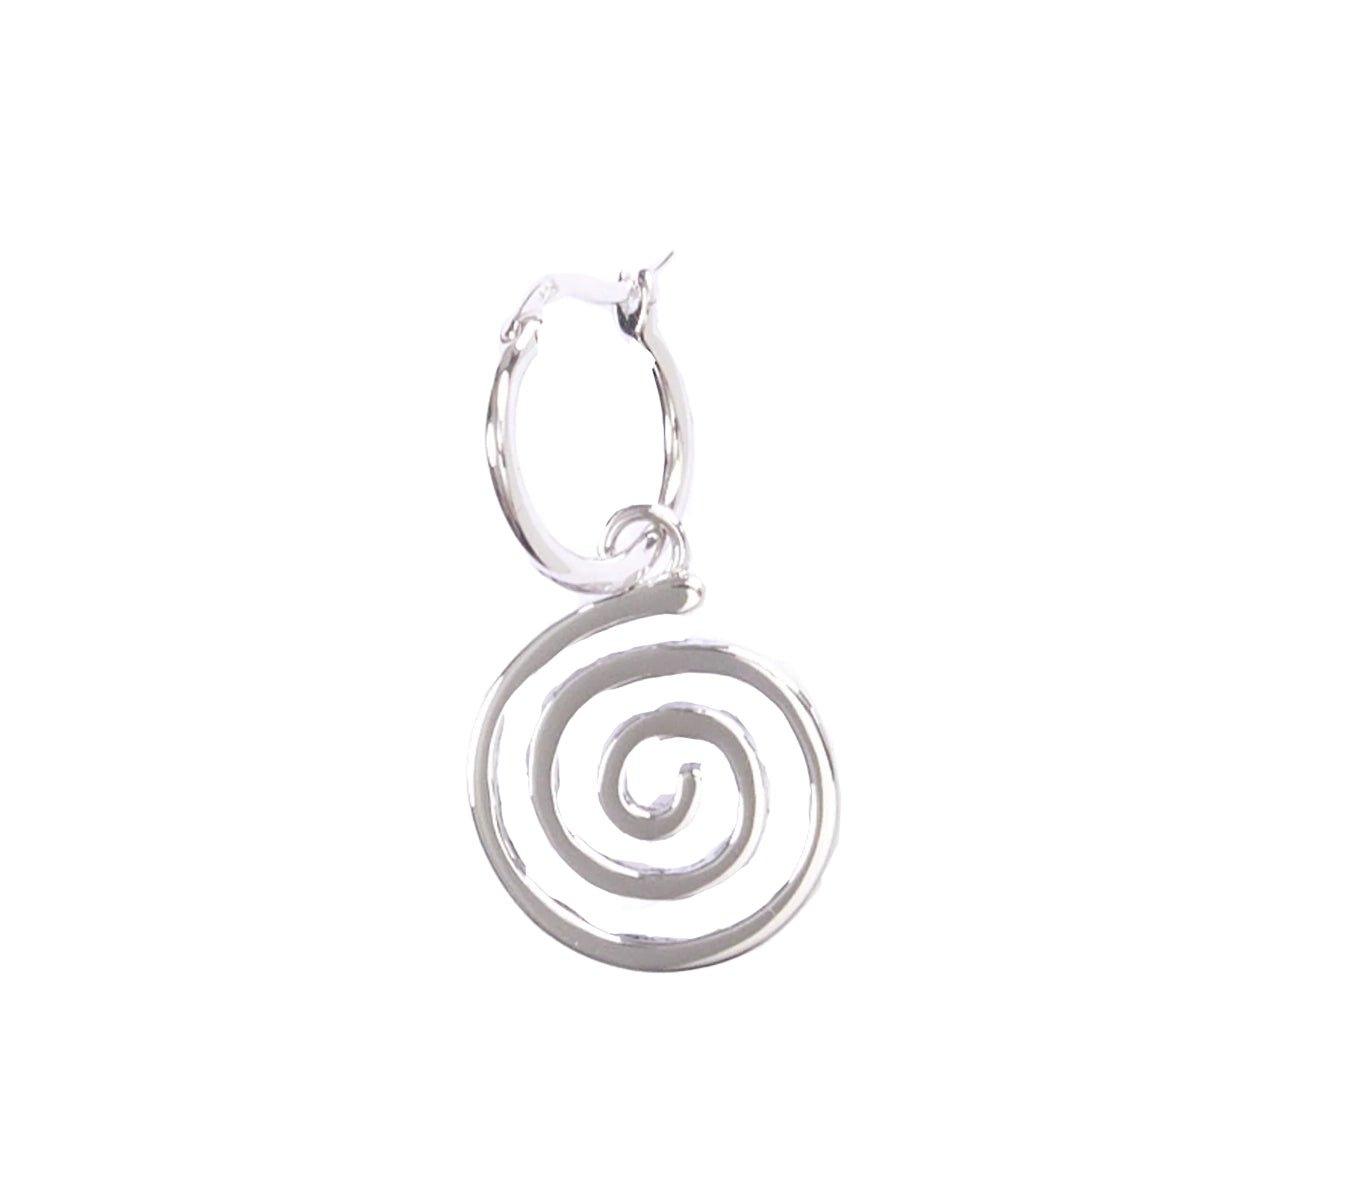 PAM / Perks and Mini Floating Spiral Earring - Silver - SUPERCONSCIOUS BERLIN